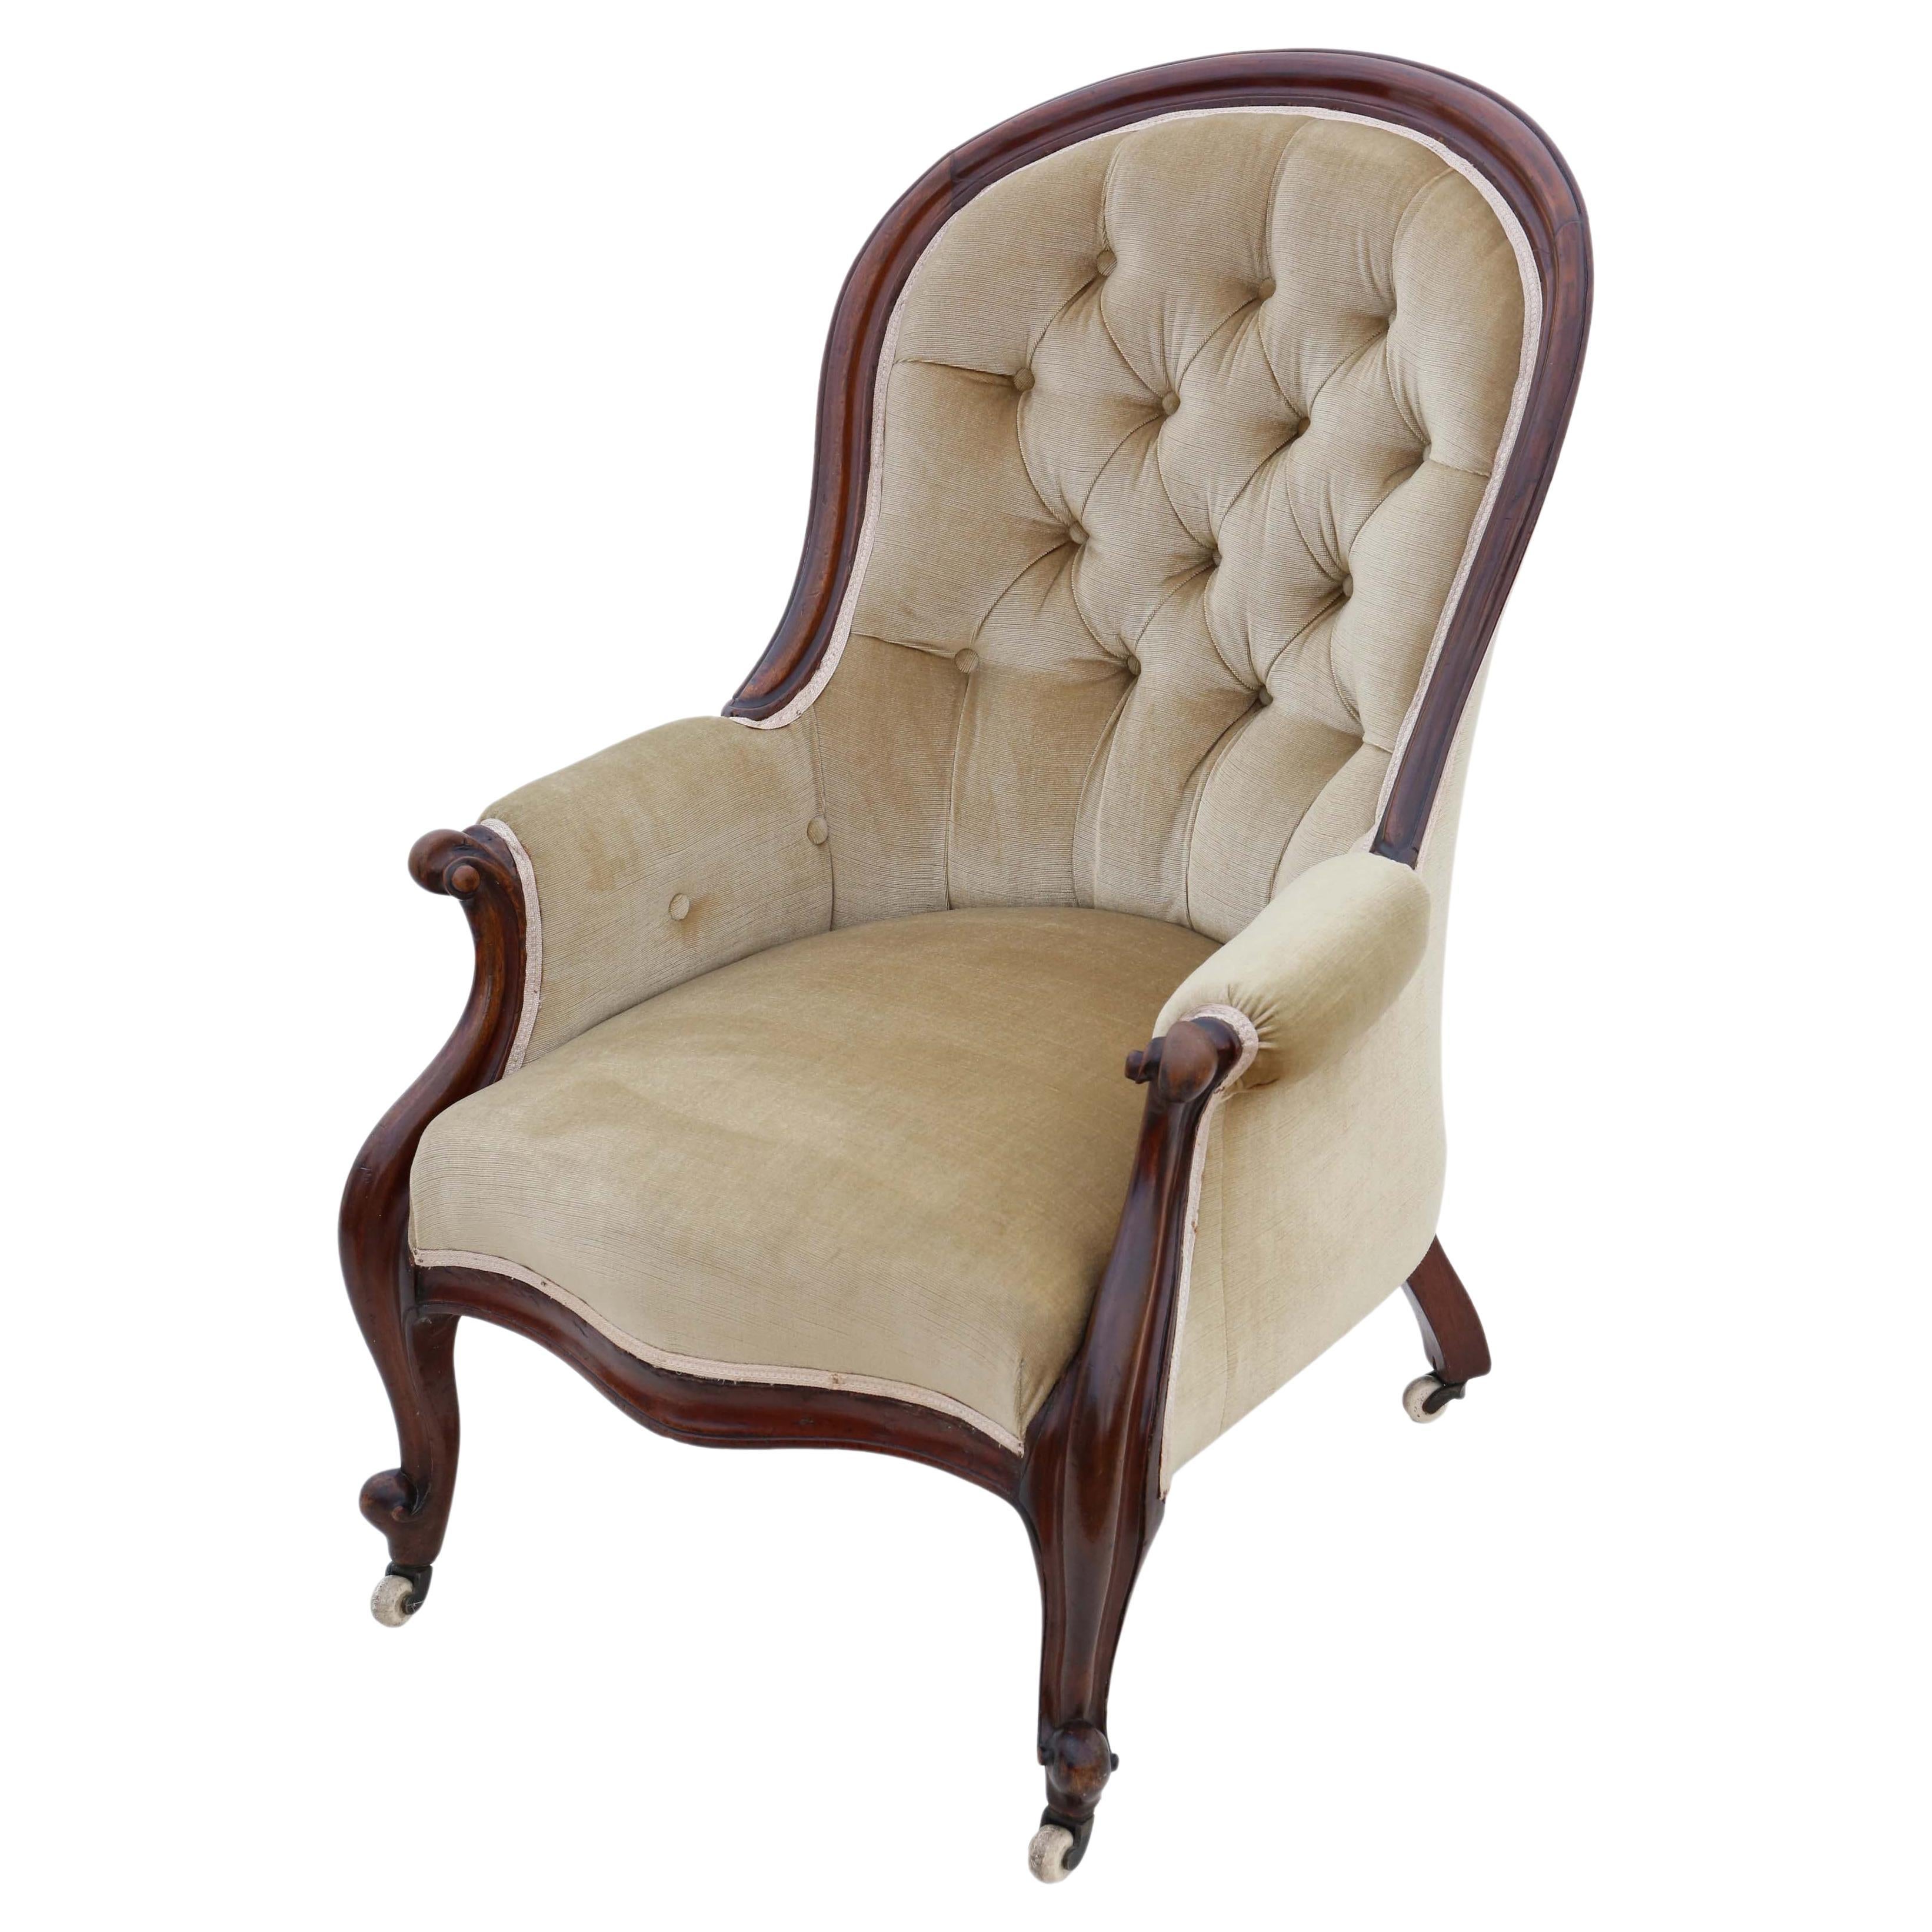 Antique Victorian Mahogany Spoon Back Slipper Armchair For Sale at 1stDibs  | antique slipper chair, antique victorian slipper chair, what are  brewster, spoonback and fauteuil all types of